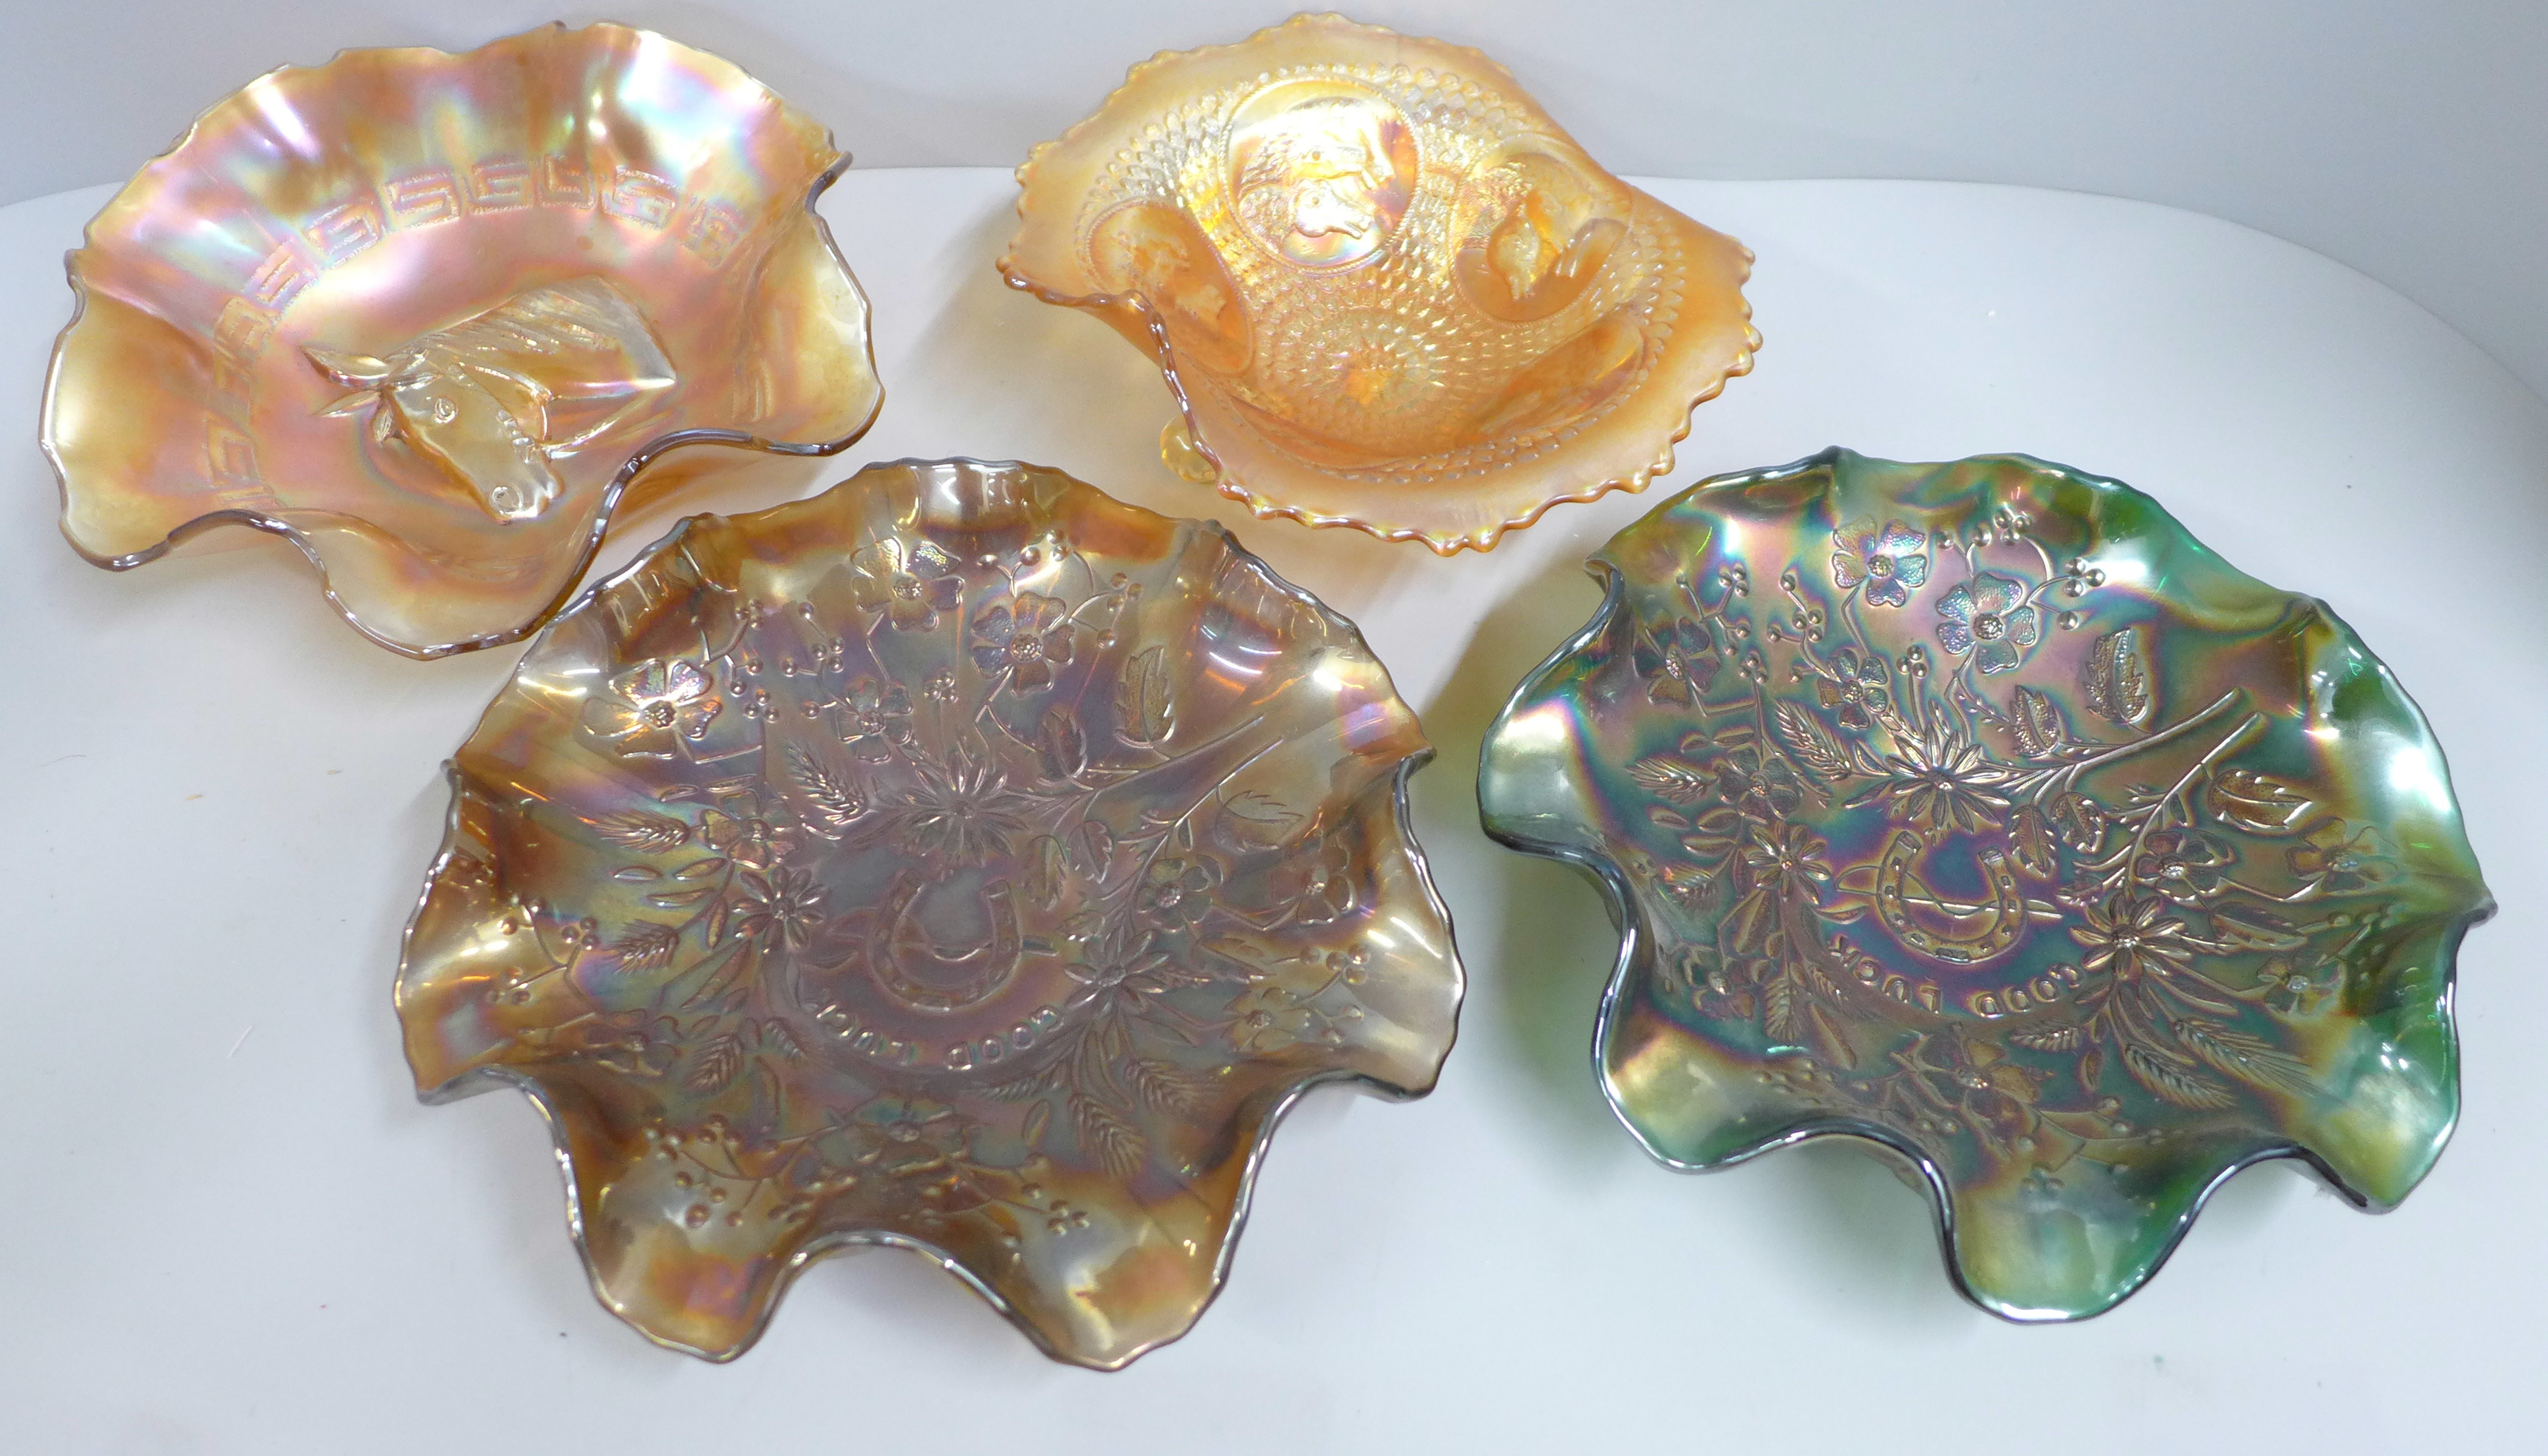 Four carnival glass bowls, two 'Good Luck', one Racehorse and one Horse Medallion, iridescent green,